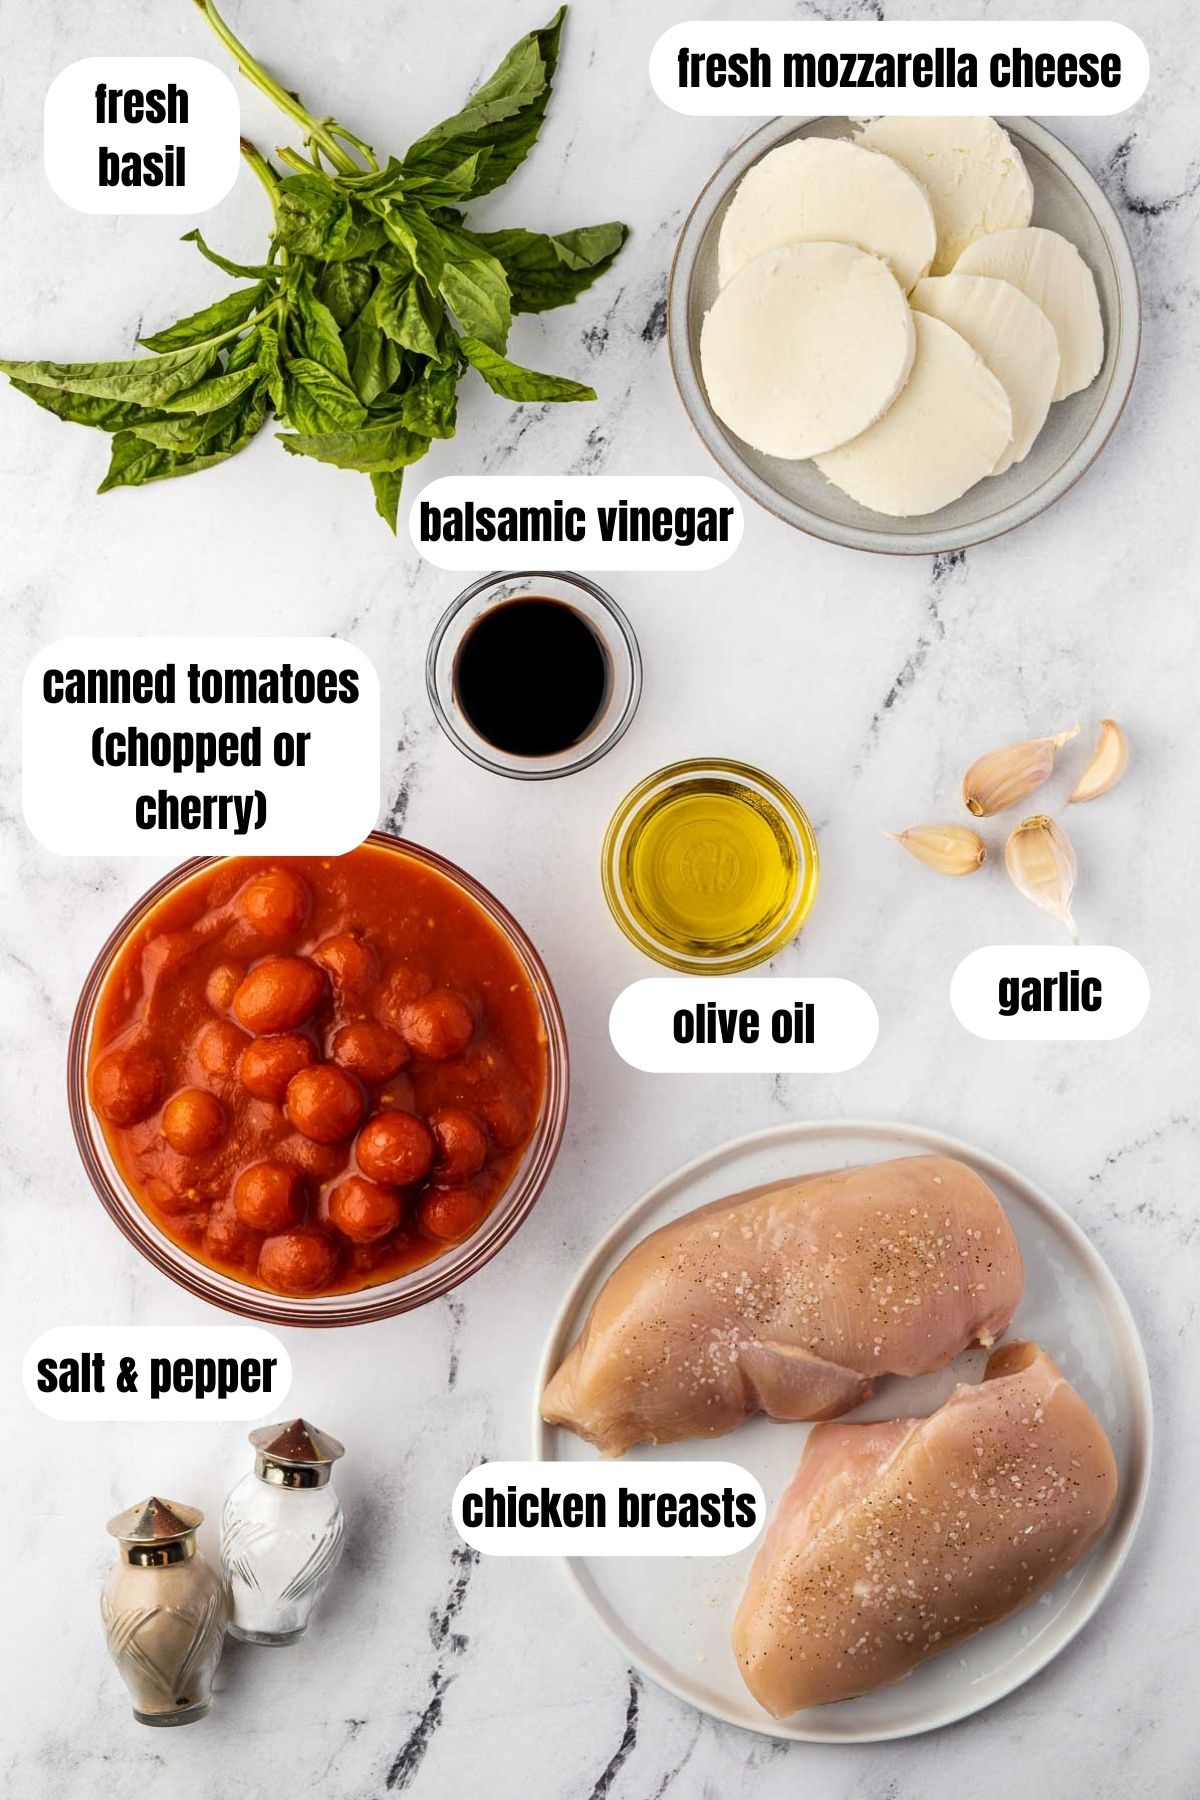 Collage of all the ingredients needed to make chicken pizzaiola, including 2 chicken breasts, salt and pepper pots, canned cherry tomatoes, olive oil, garlic, balsamic vinegar, fresh sliced mozzarella and fresh basil.